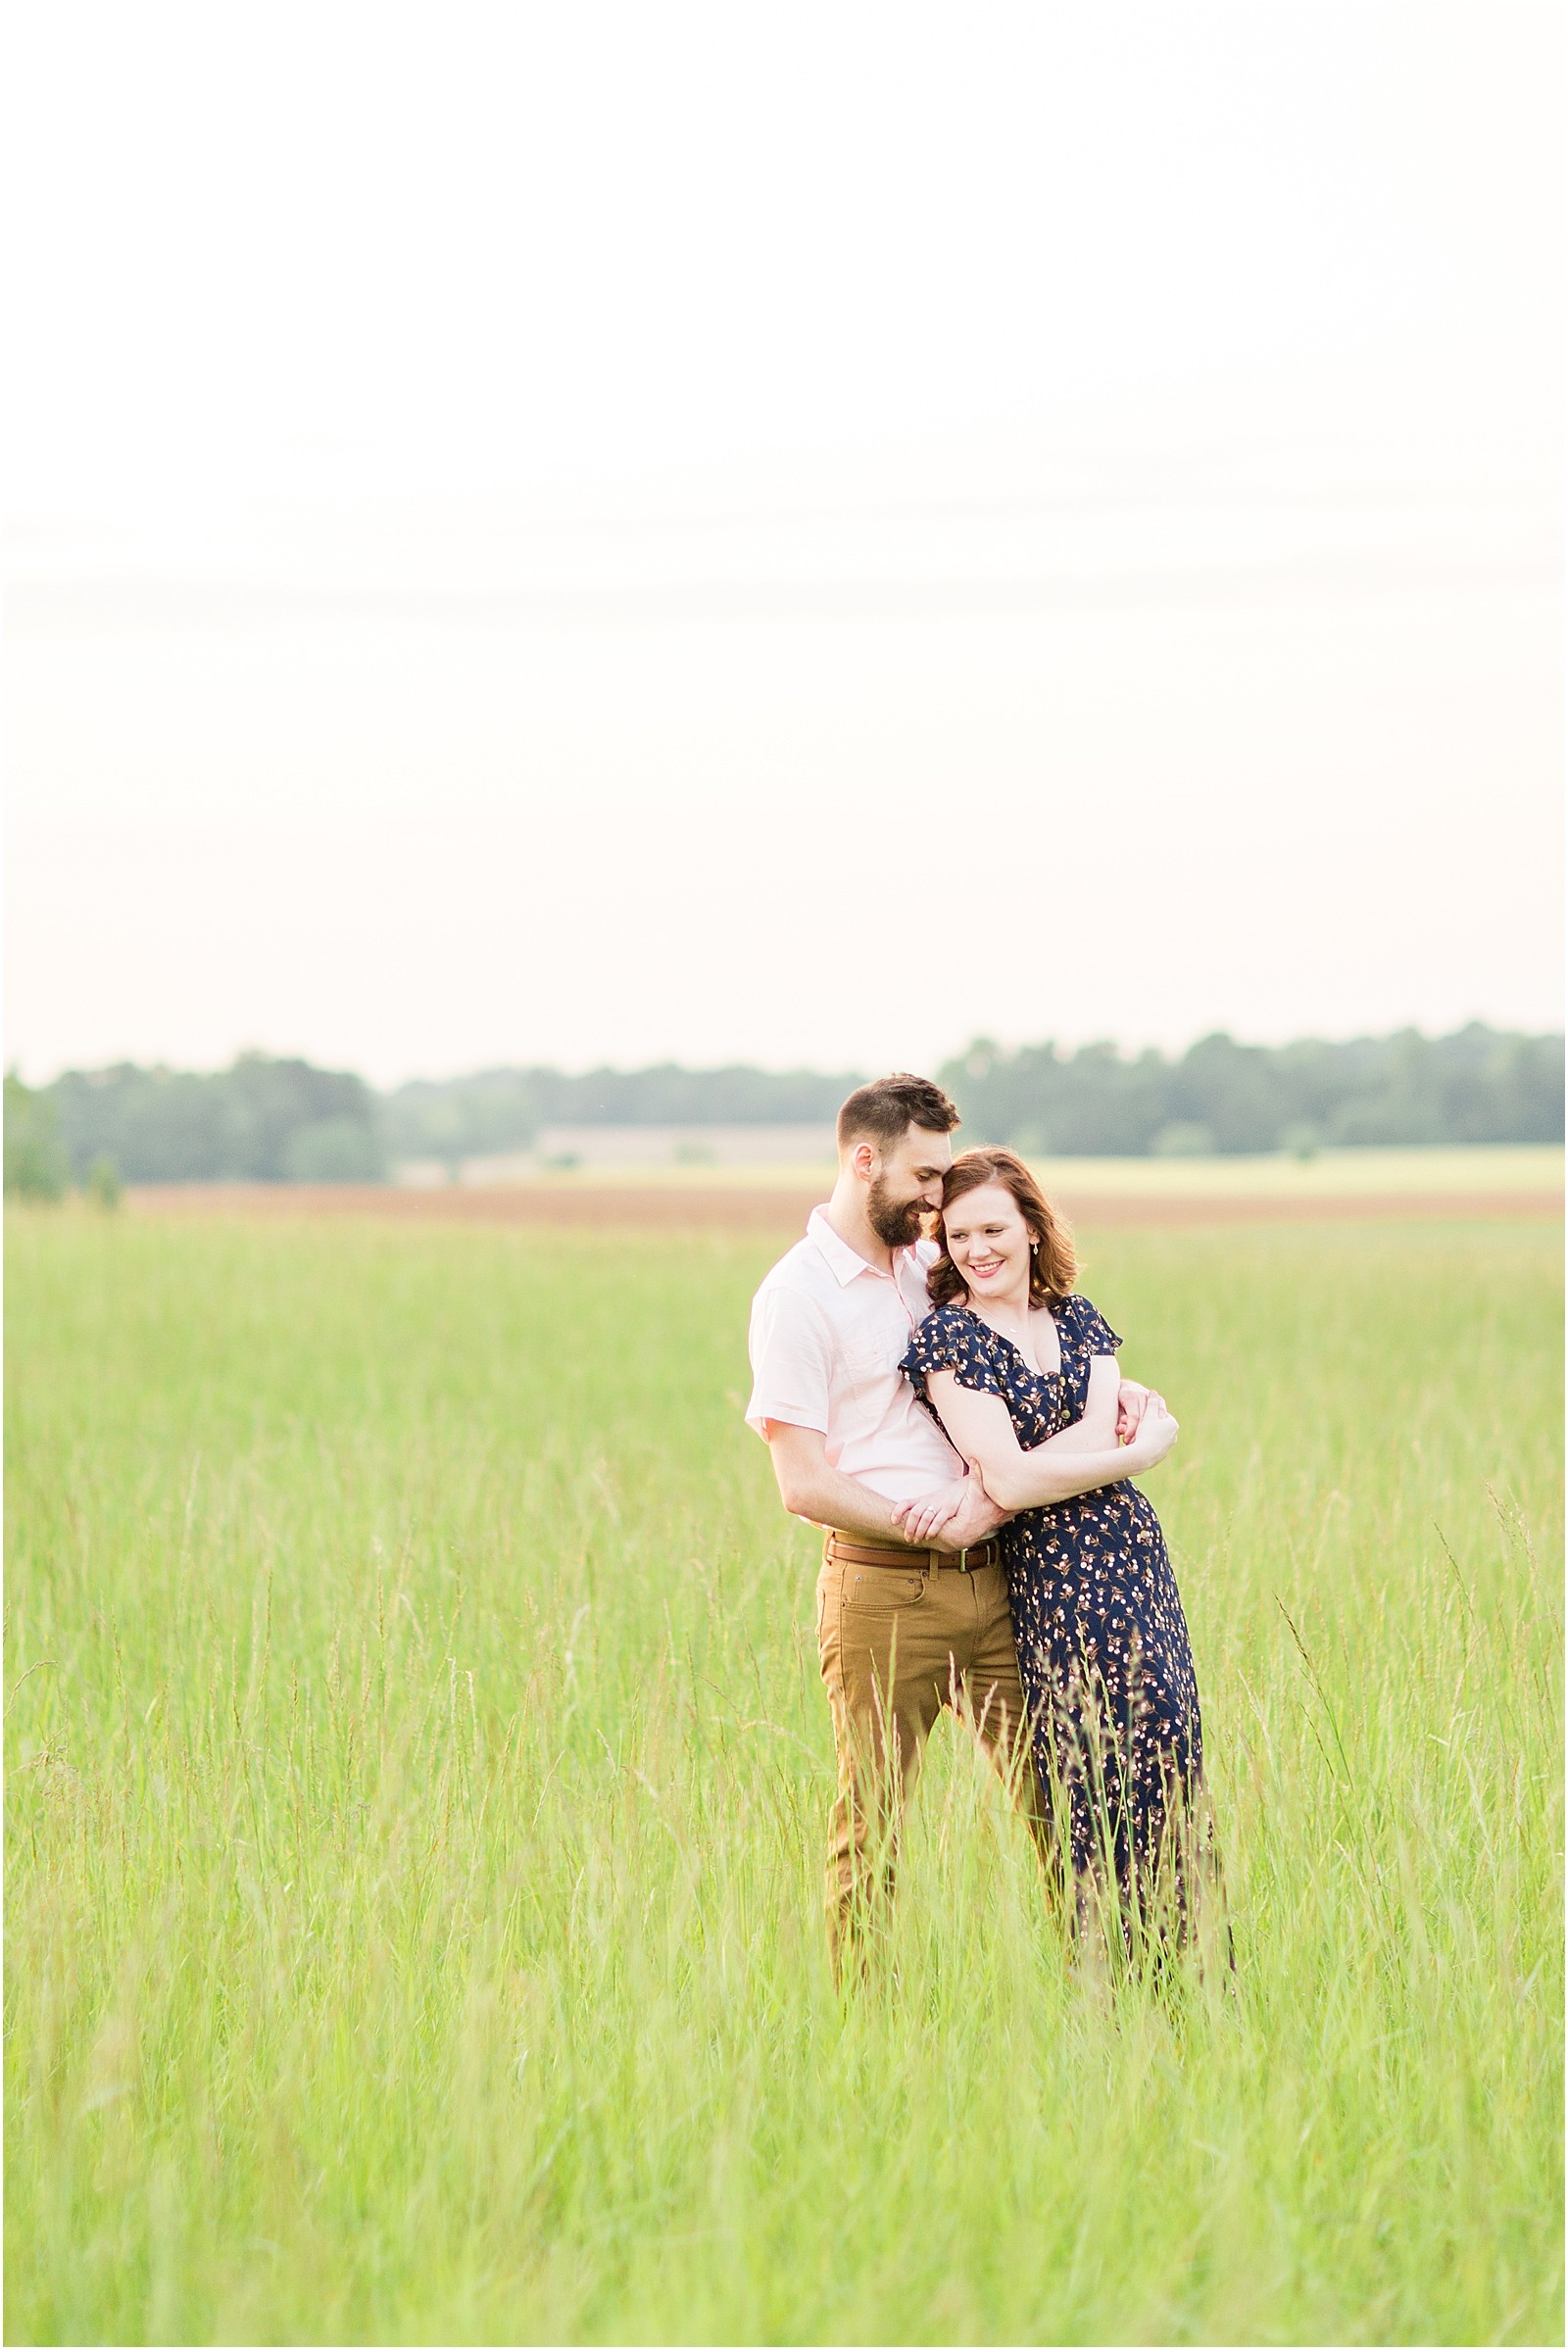 Amy and Logan | The Corner House Bed and Breakfast | Engagement Session025.jpg